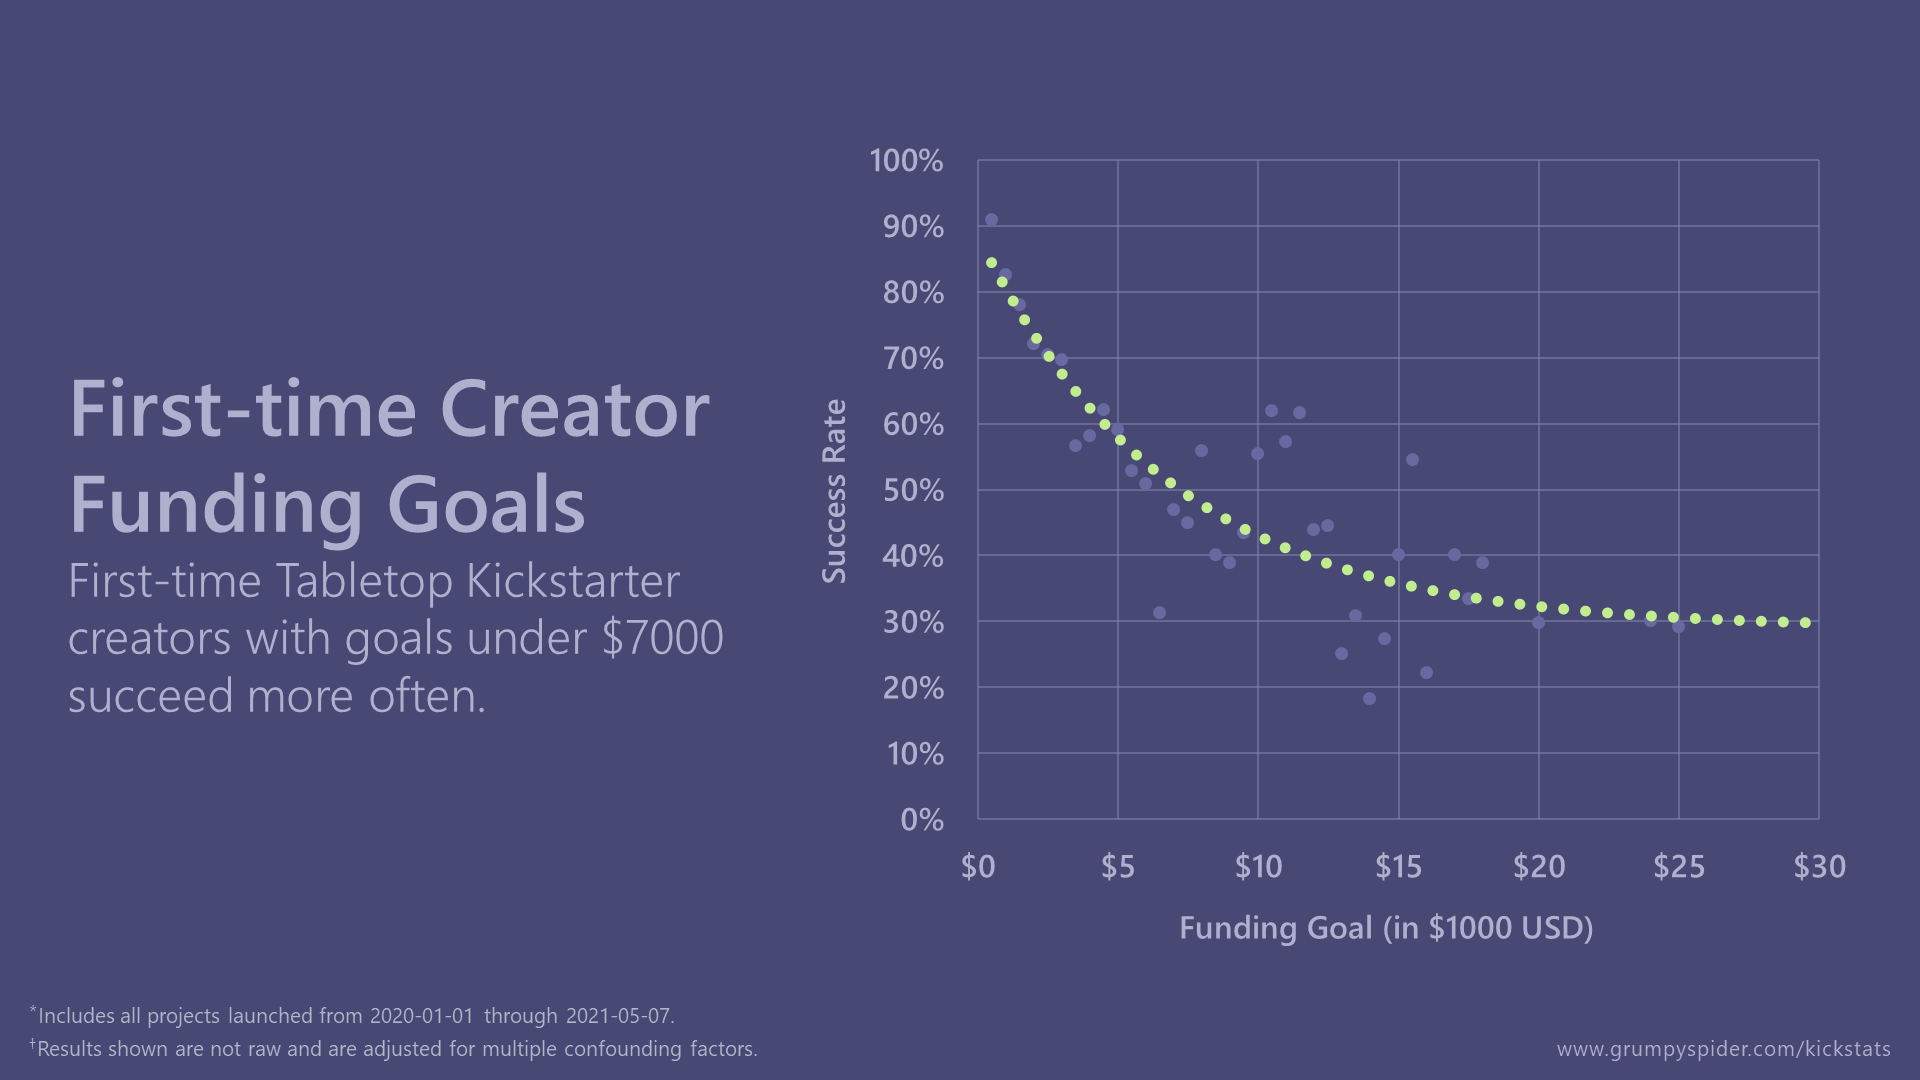 Graph showing that first-time tabletop Kickstarter creators with goals under $7000 succeed more often.